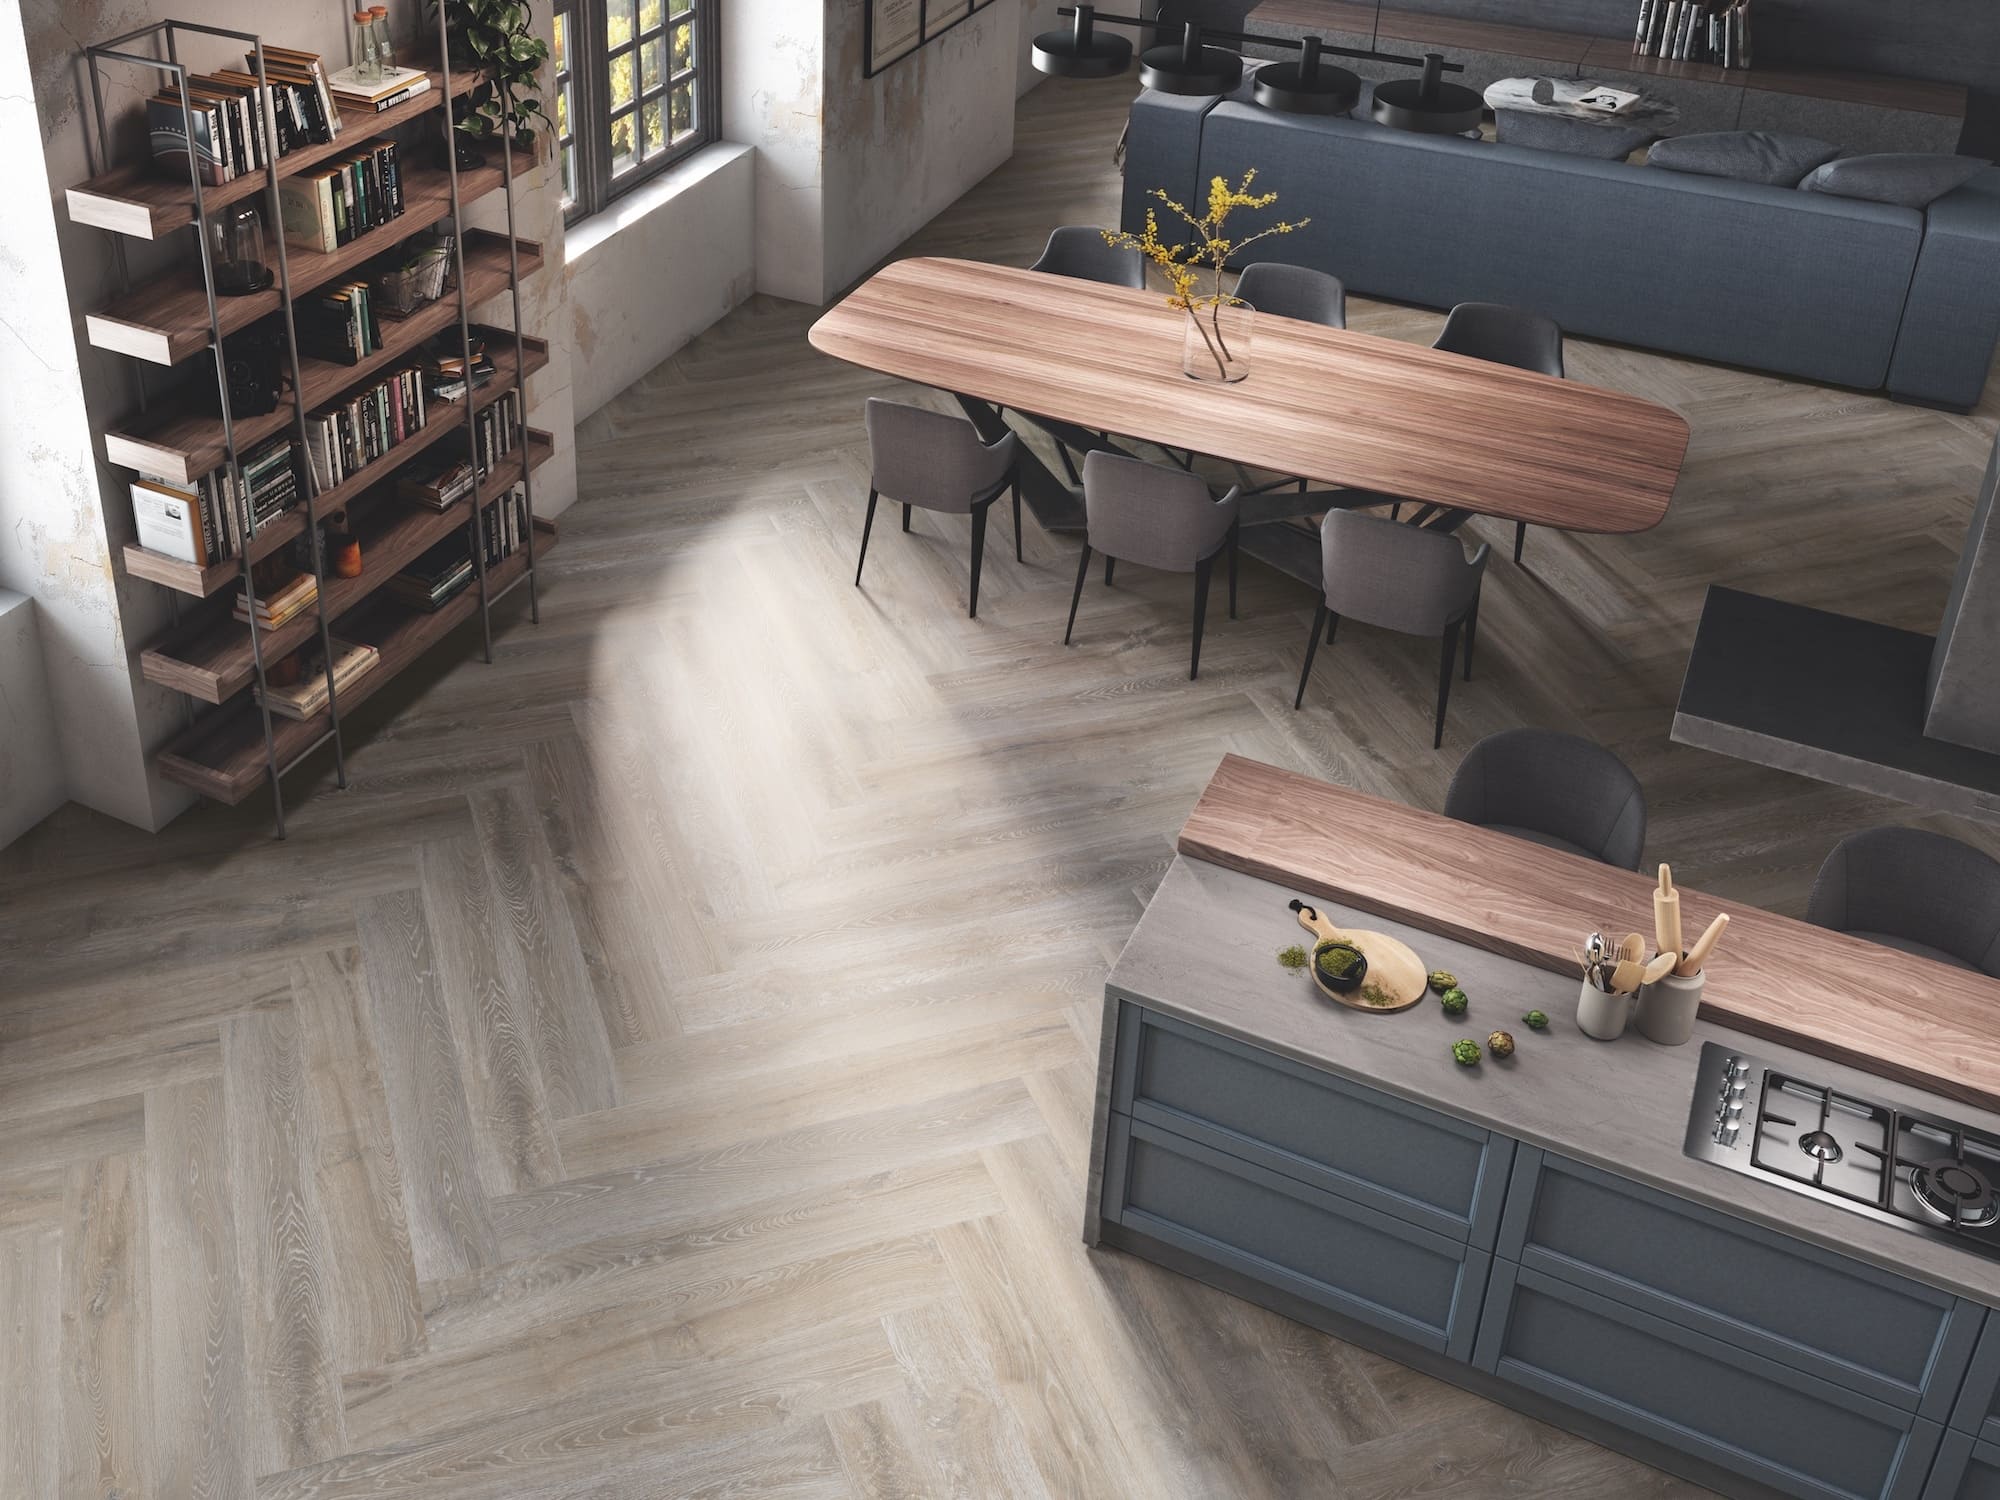 Kitchens with wood-look porcelain flooring